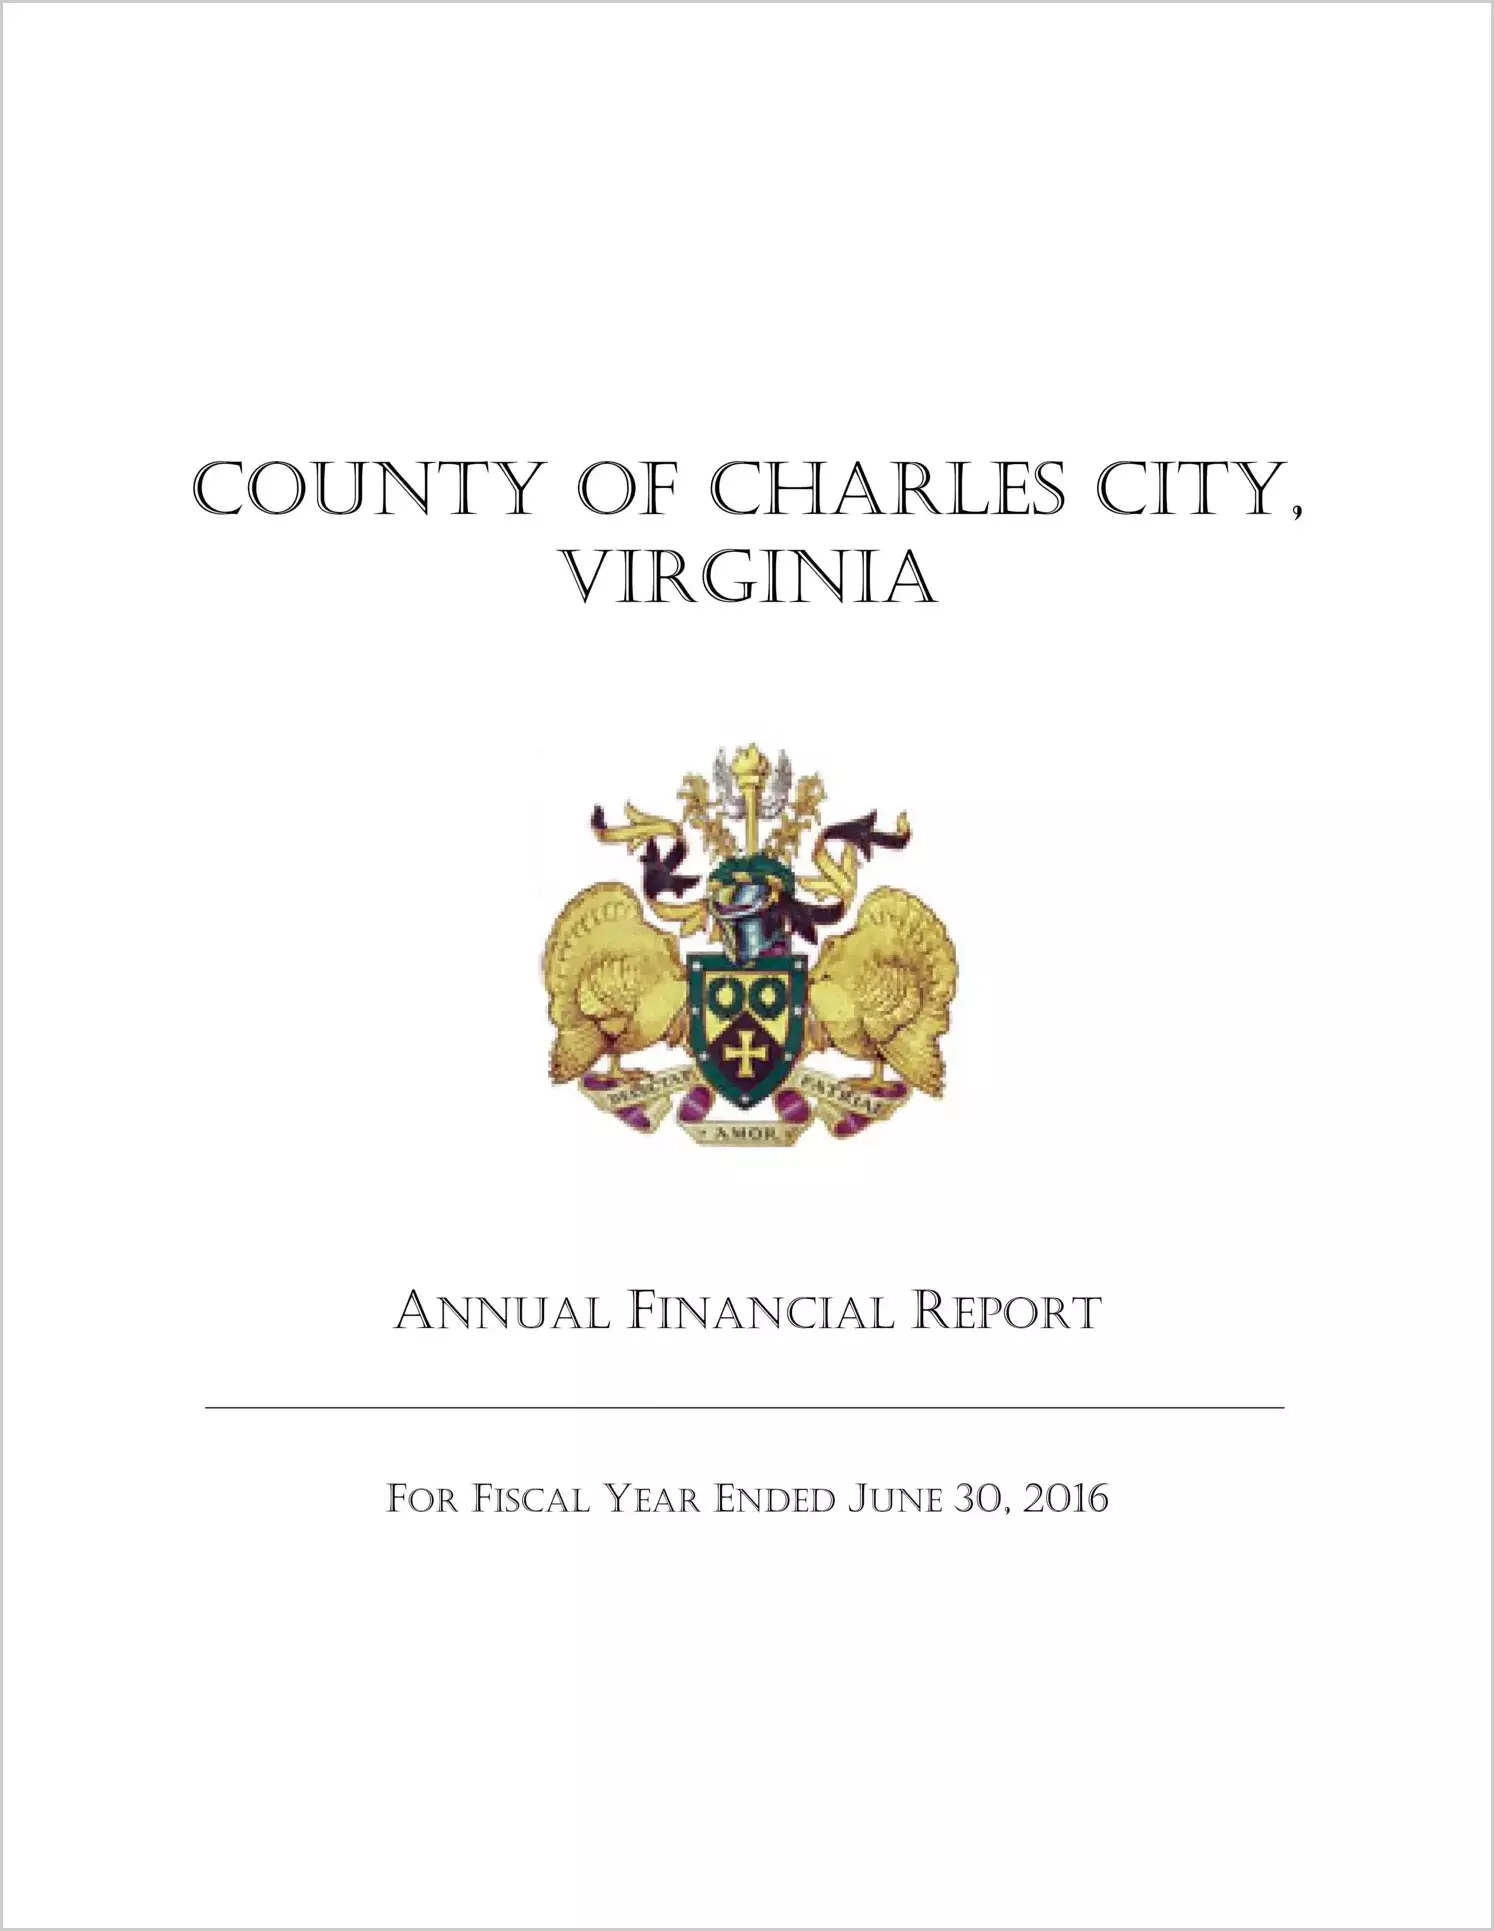 2016 Annual Financial Report for County of Charles City